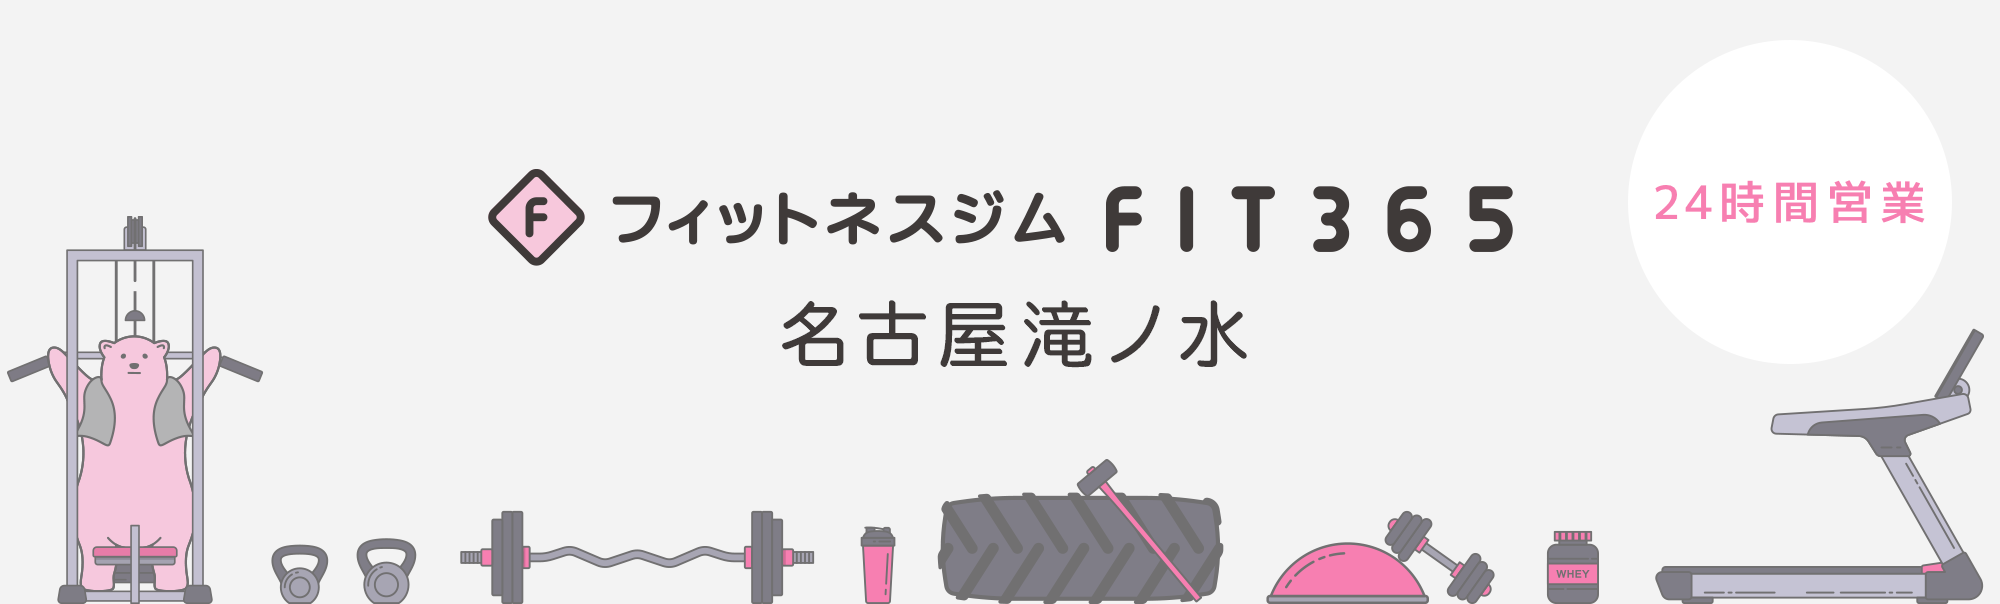 FIT365 名古屋滝ノ水